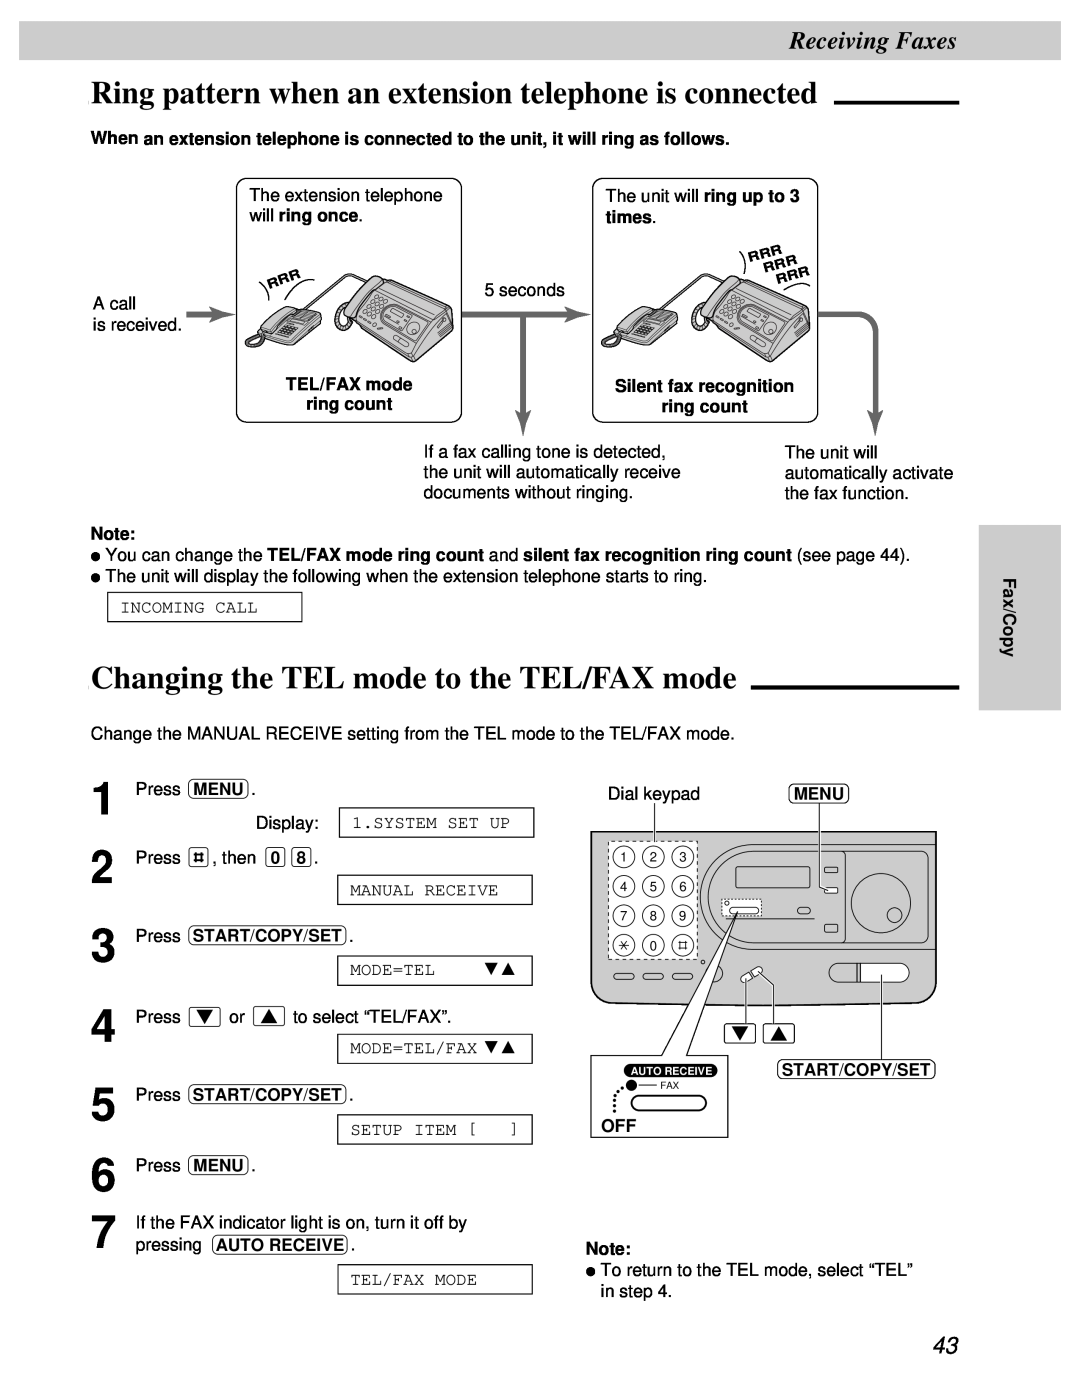 Panasonic KX-FT31BX Ring pattern when an extension telephone is connected, Changing the TEL mode to the TEL/FAX mode 